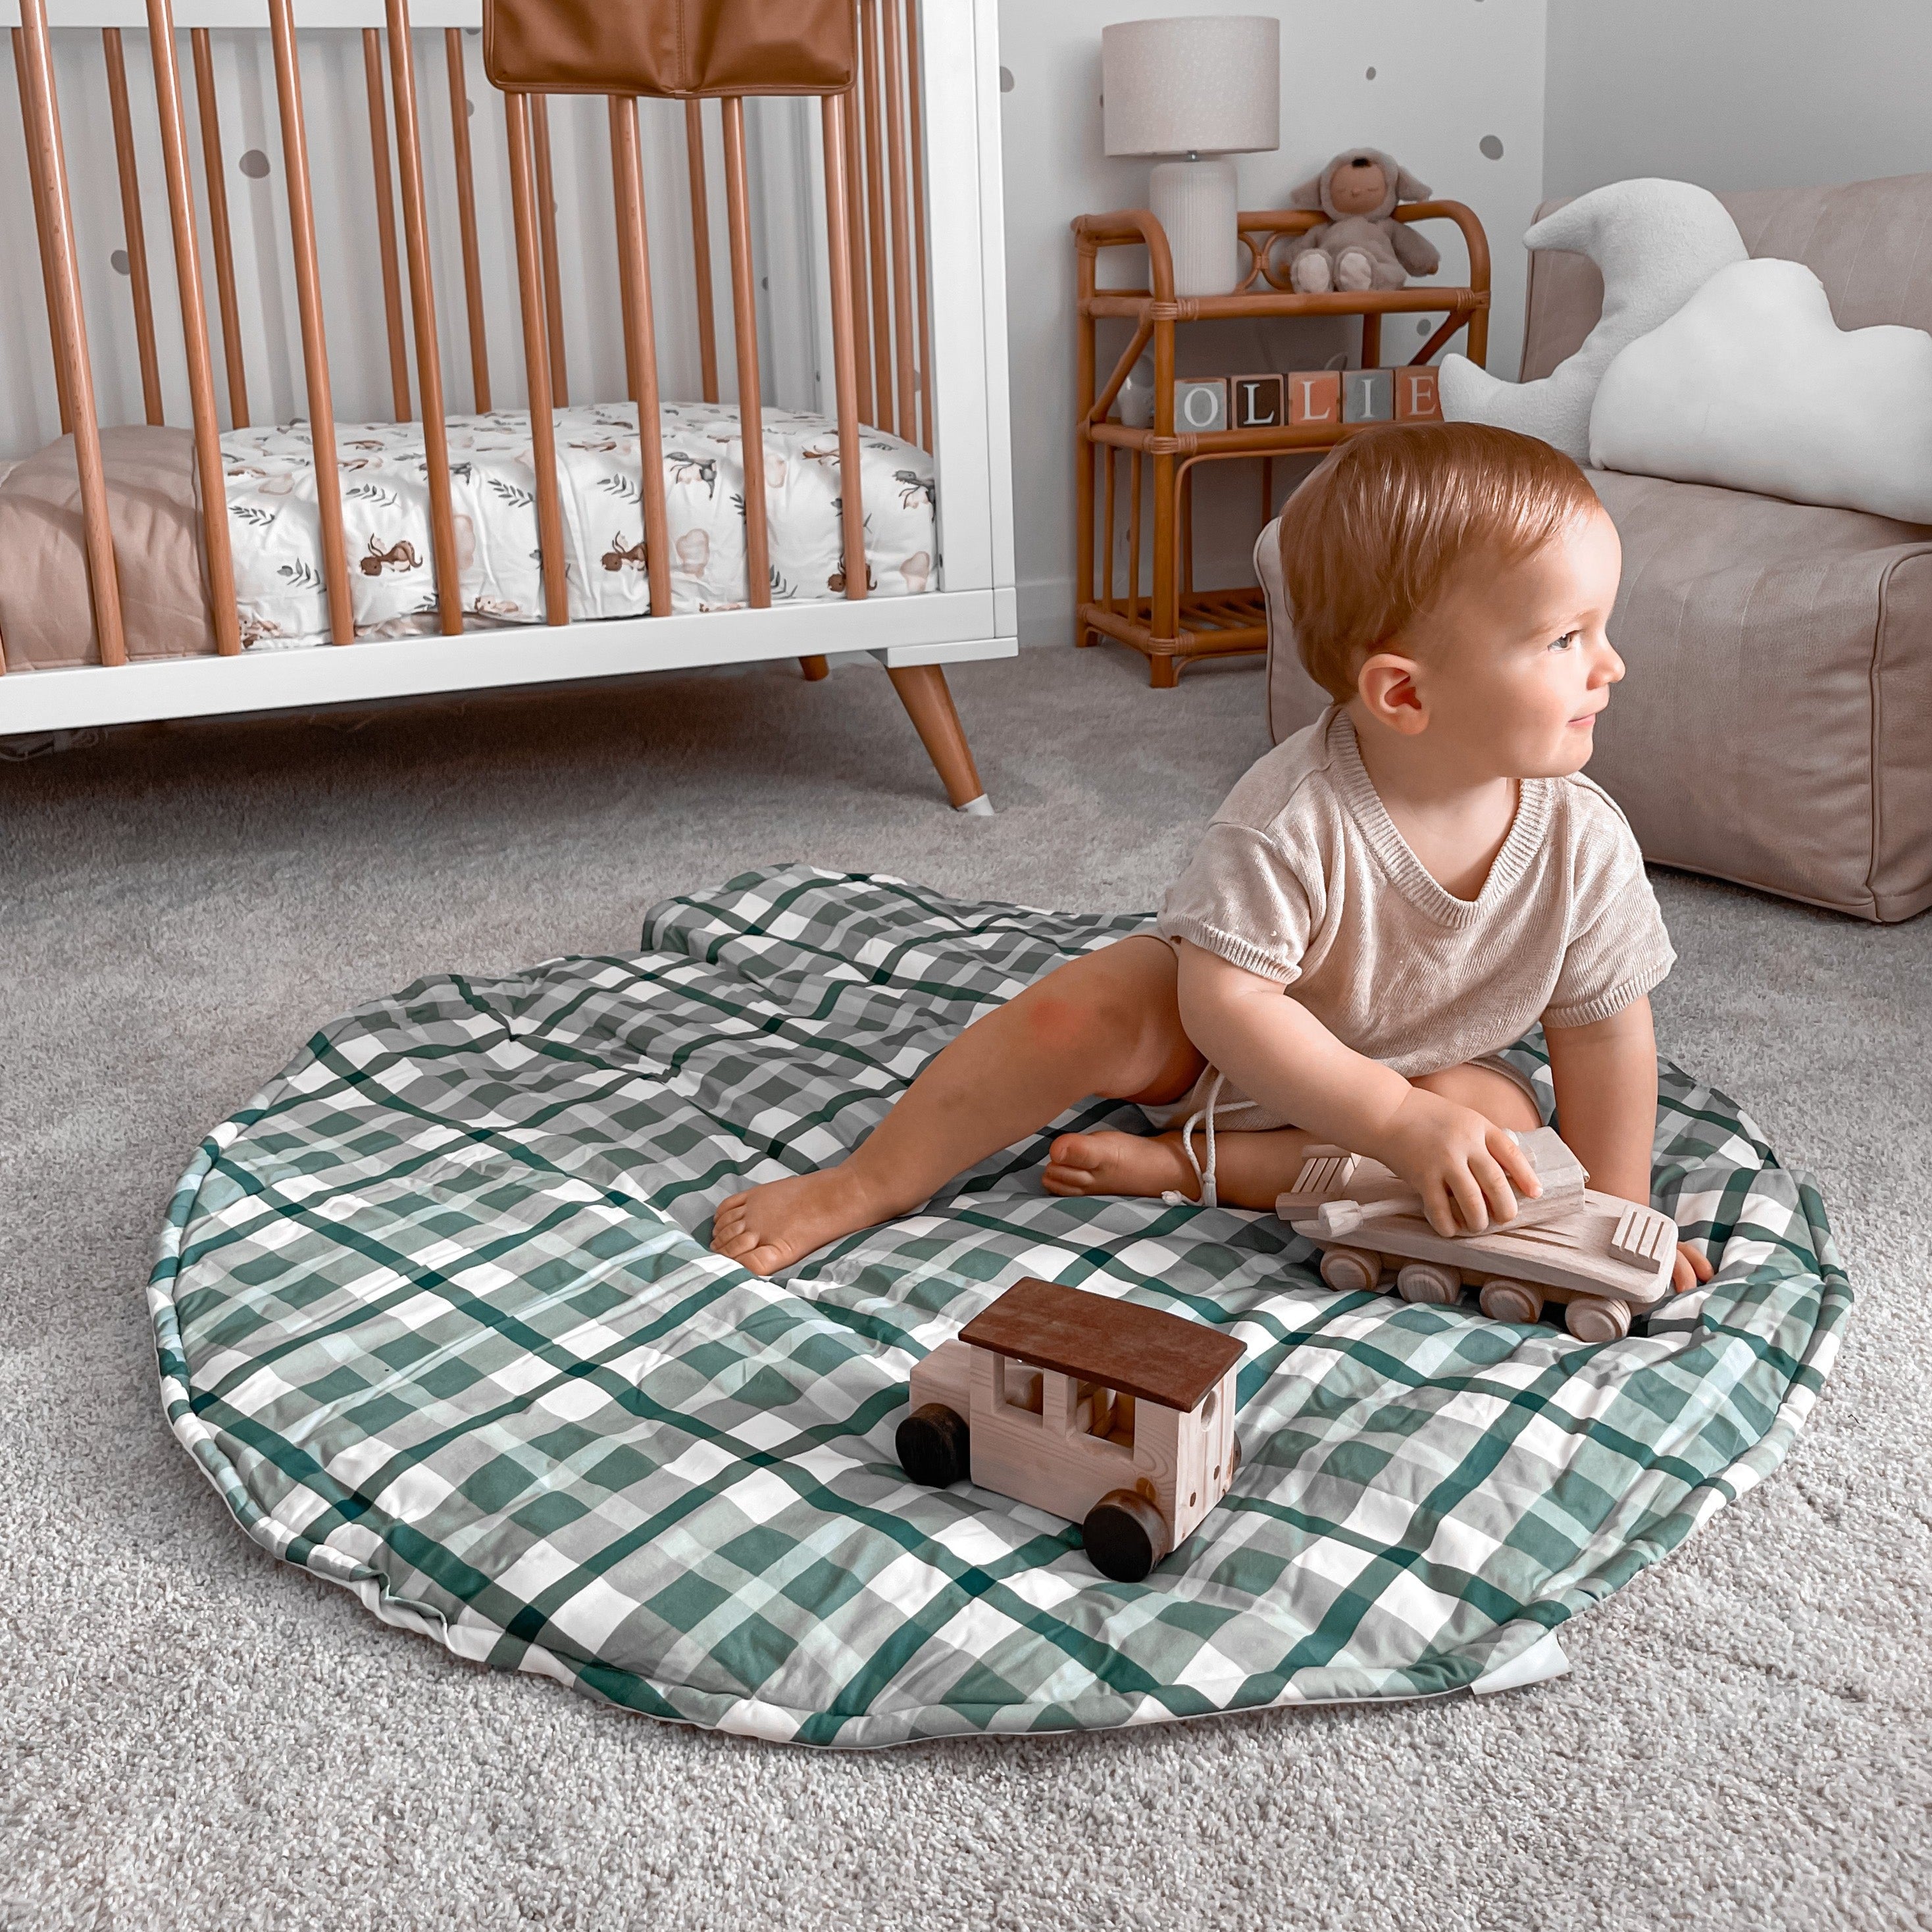 Toddler using his wooden toys on a blue plaid playmat in a modern nursery